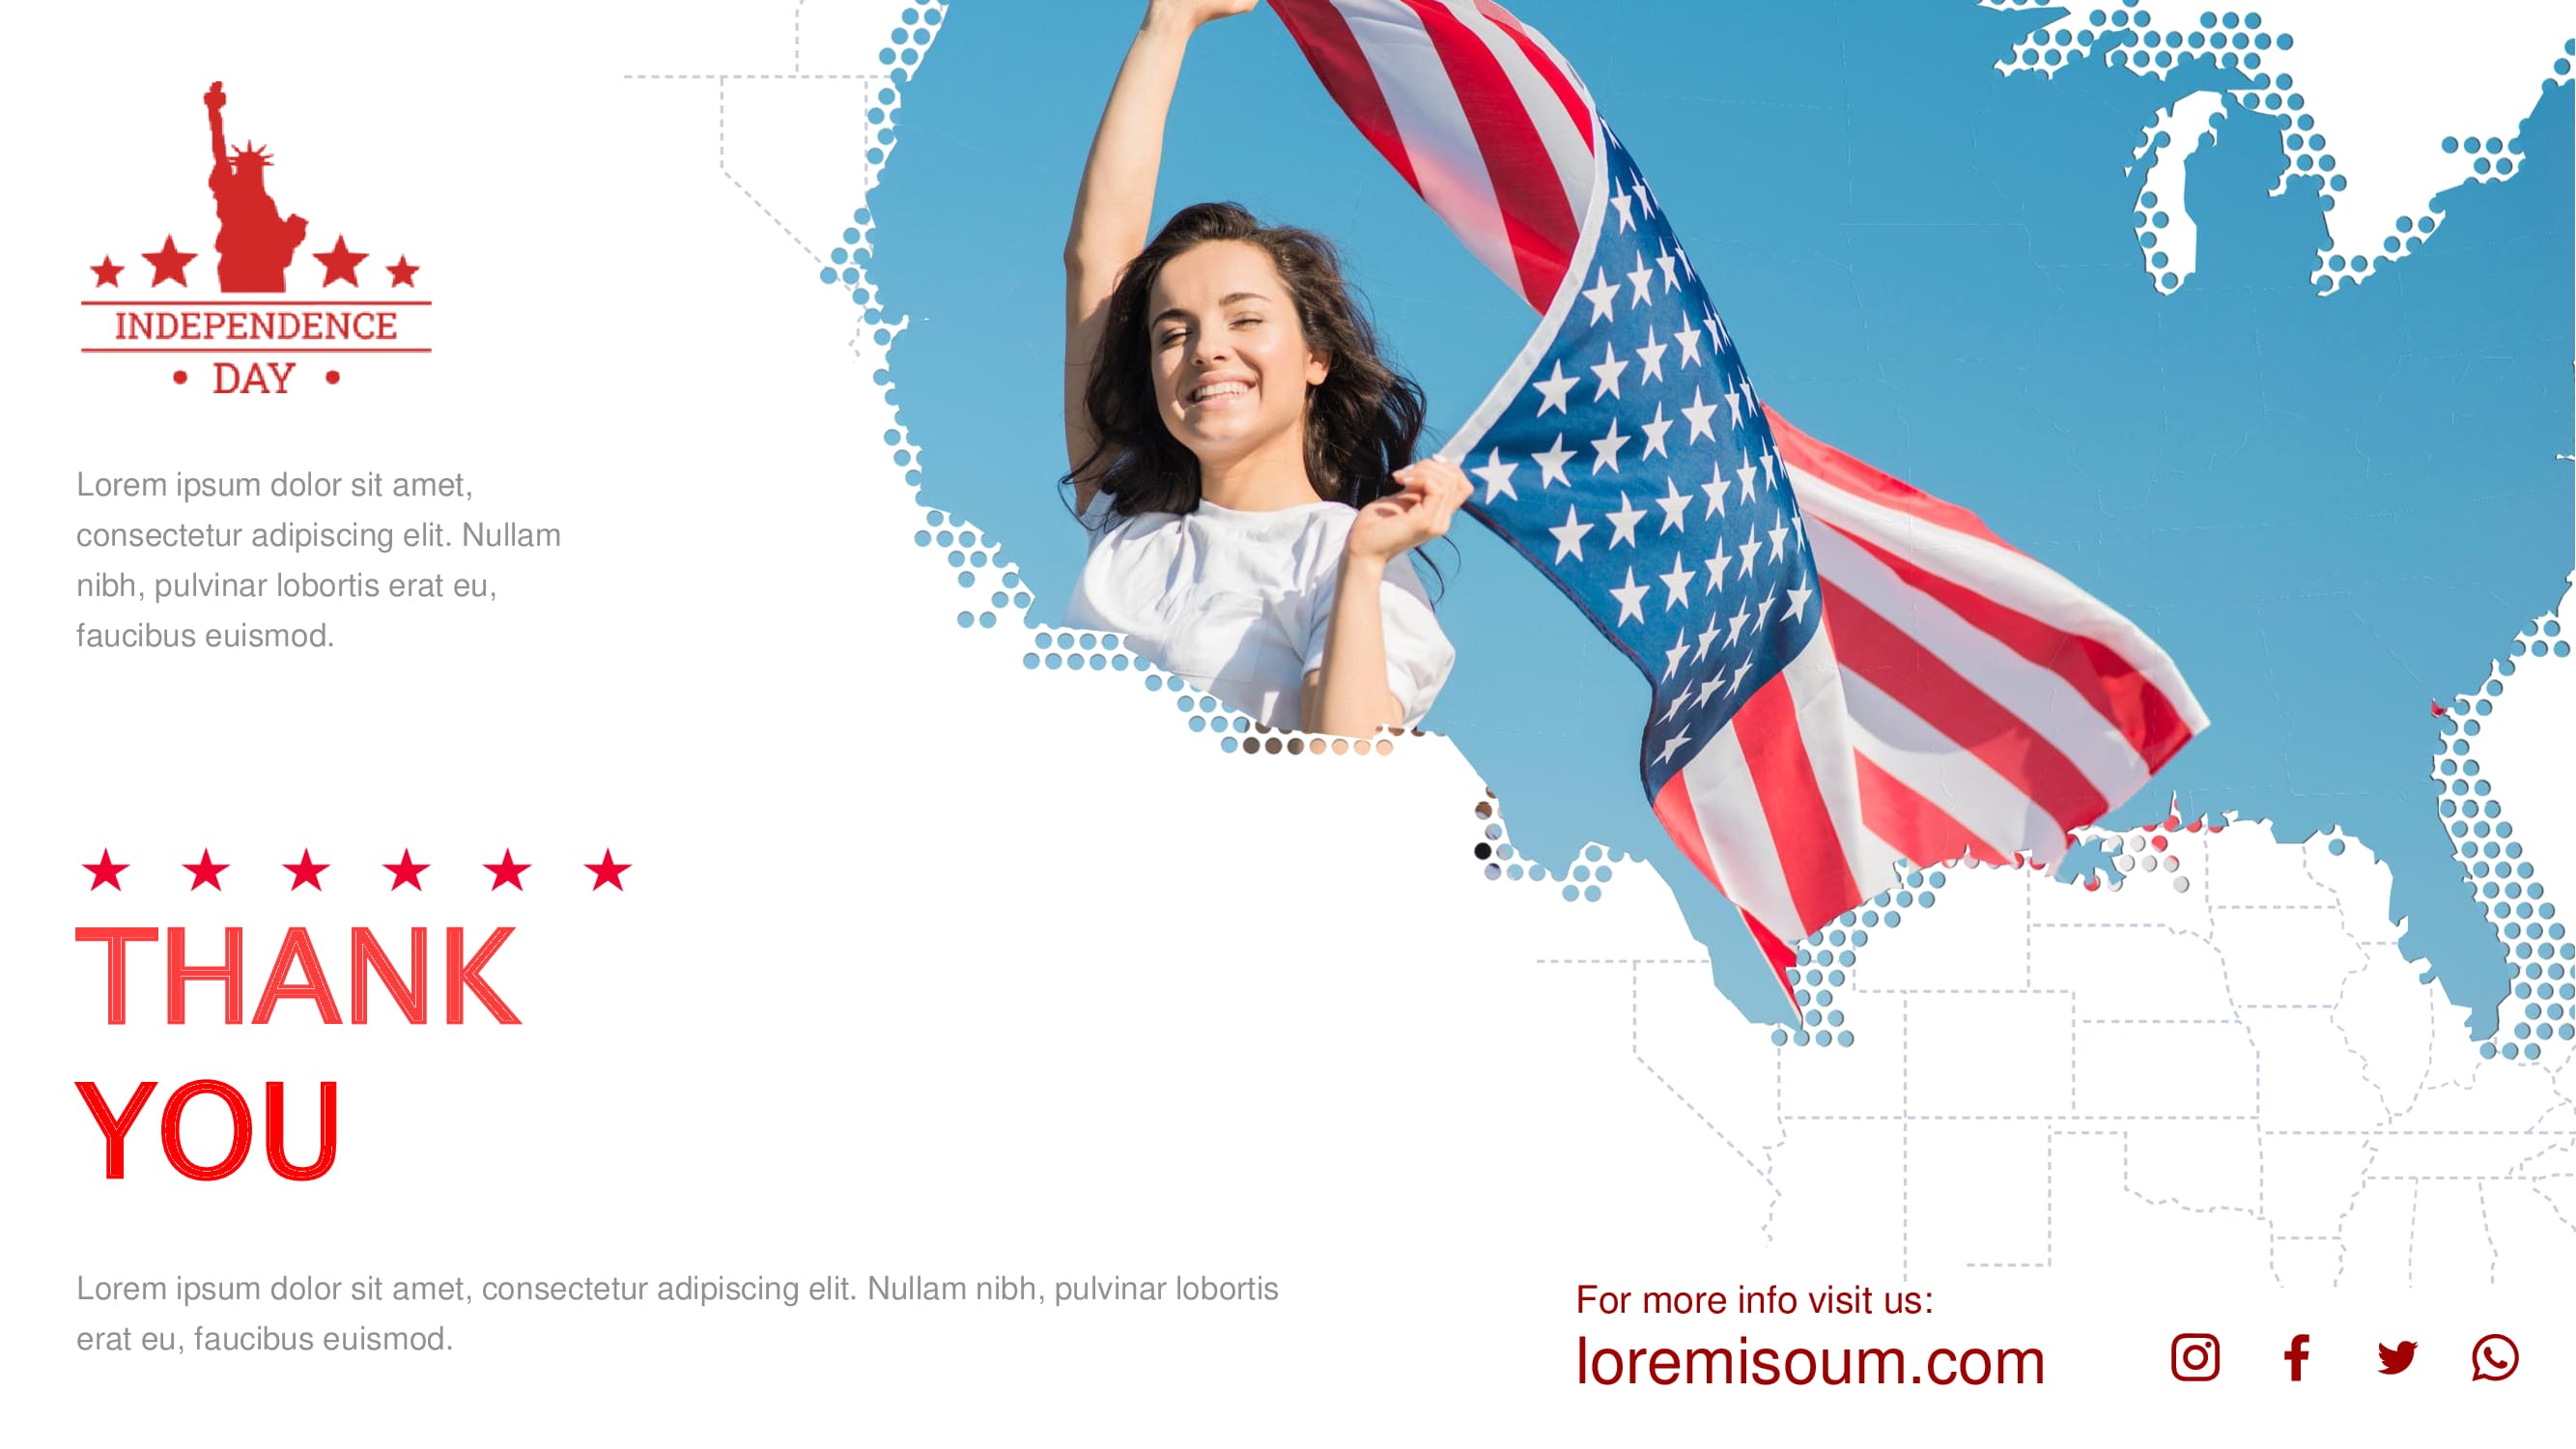 A slide with red lettering "Thank you" and image of a girl with USA flag.